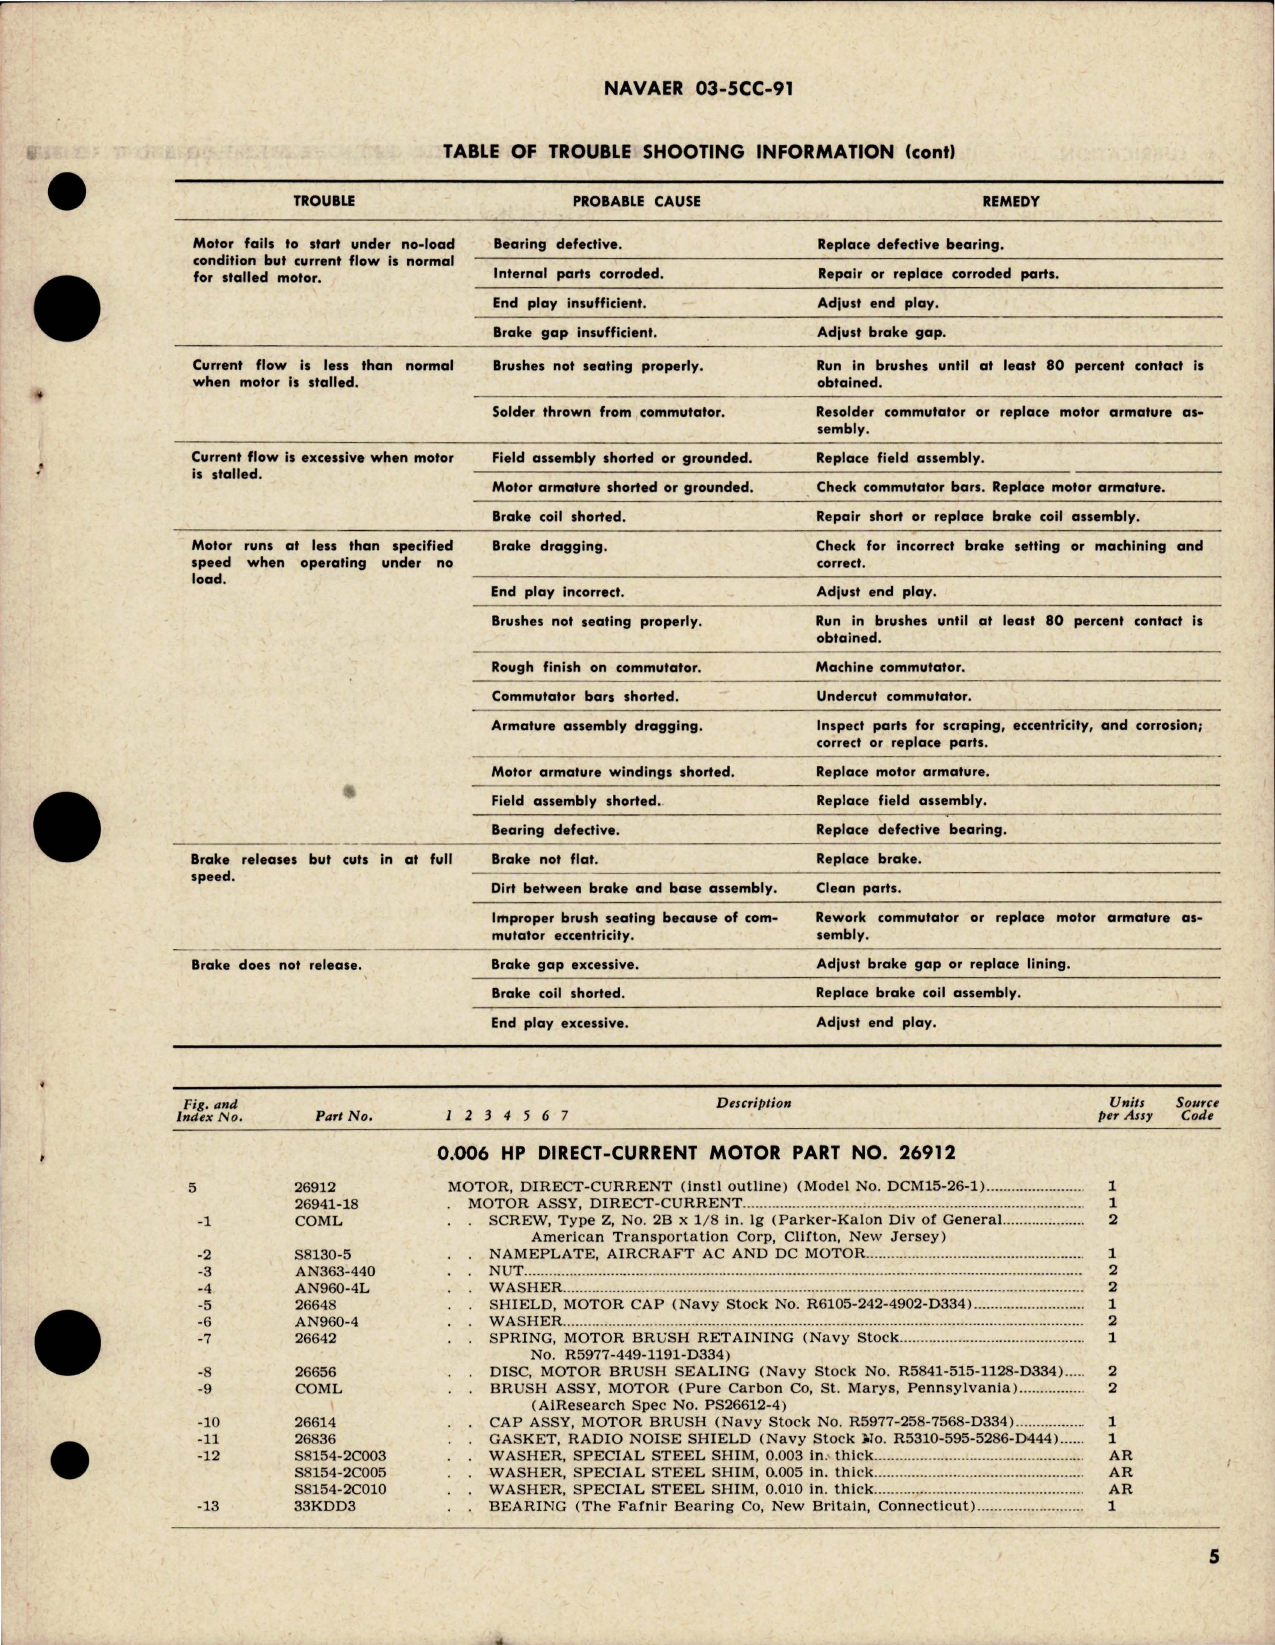 Sample page 5 from AirCorps Library document: Overhaul Instructions with Parts Breakdown for Direct Current Motor 0.006 HP - Part 26912 - Model DCM15-26-1